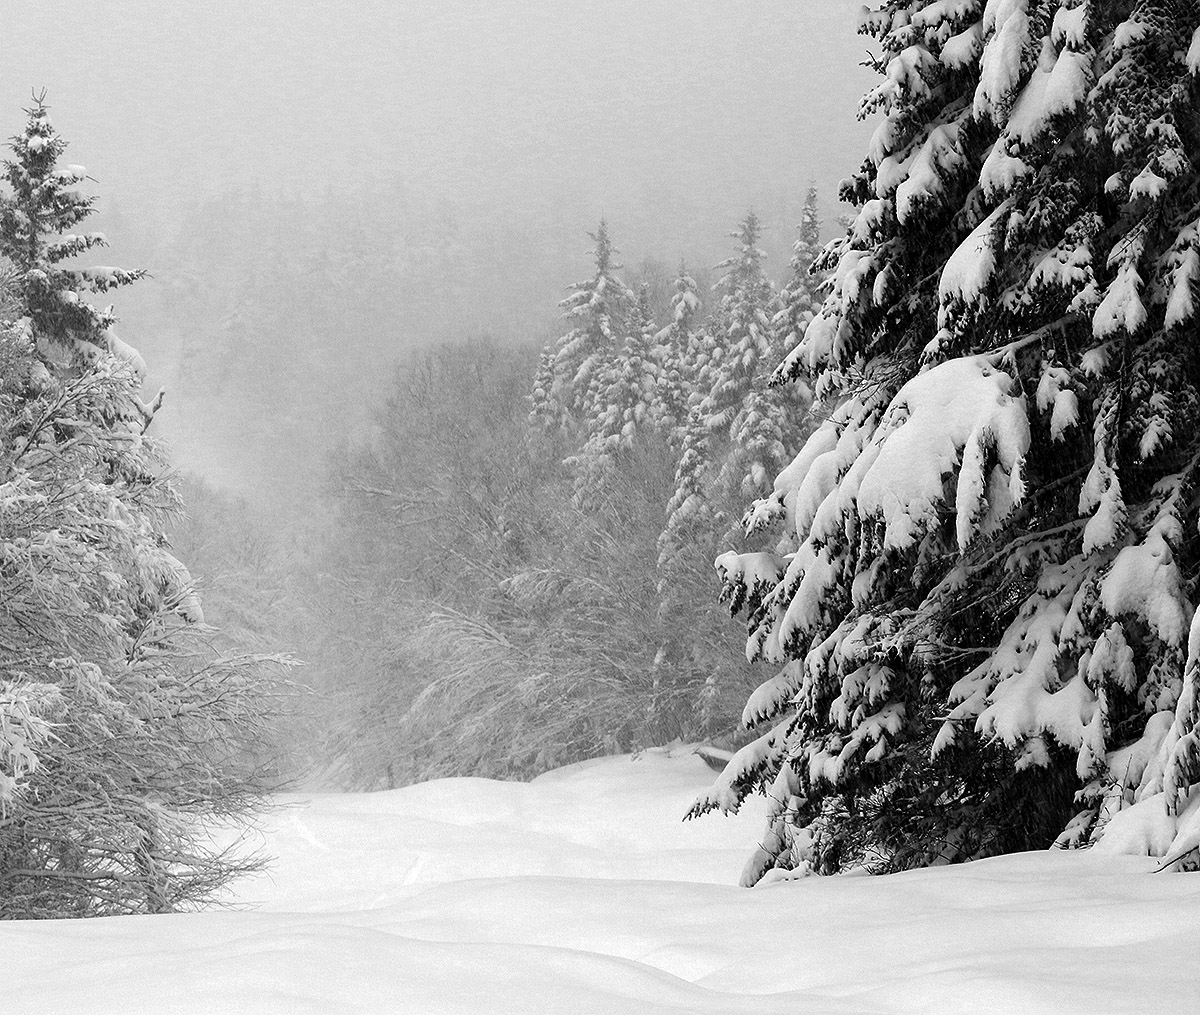 An image looking down the Villager ski trail choked with fresh snow from near the Timberline Summit during a December snowstorm at Bolton Valley Ski Resort in Vermont